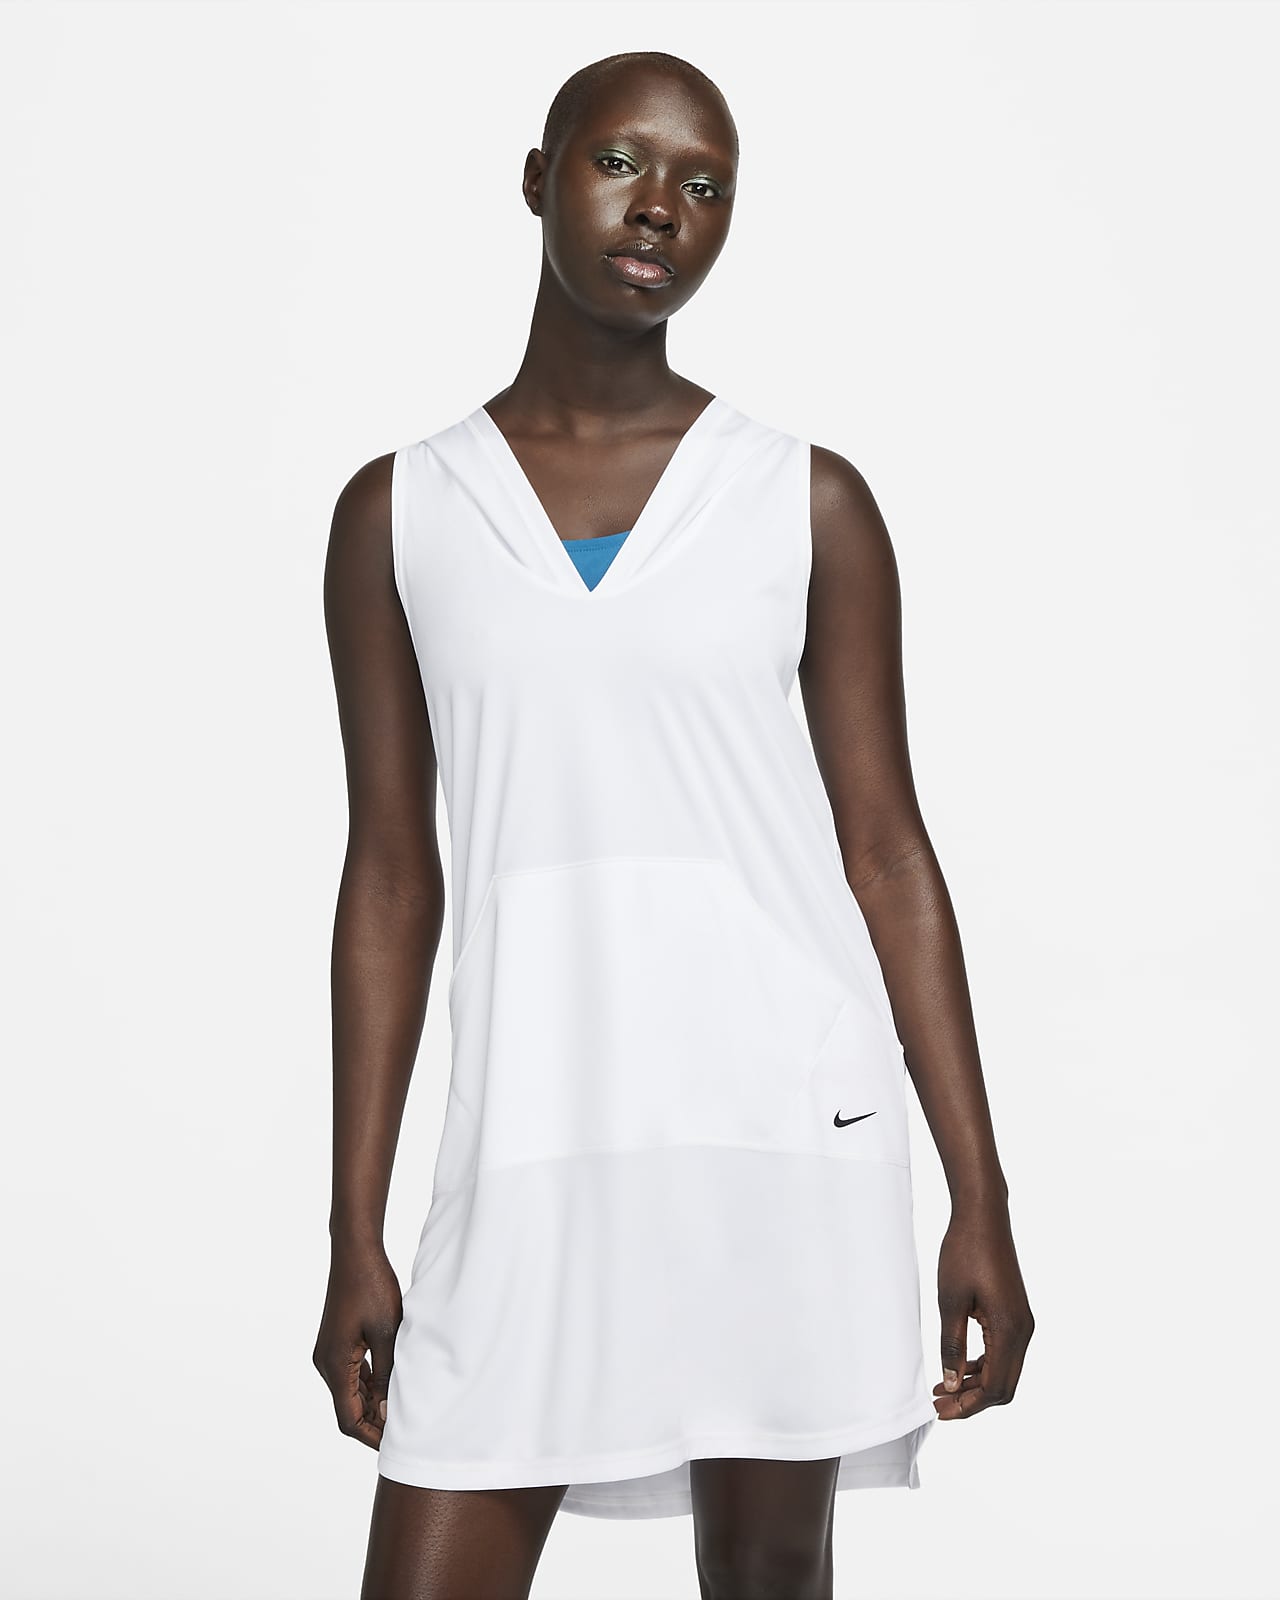 Nike Solid Cover-Up Women's Hooded Dress